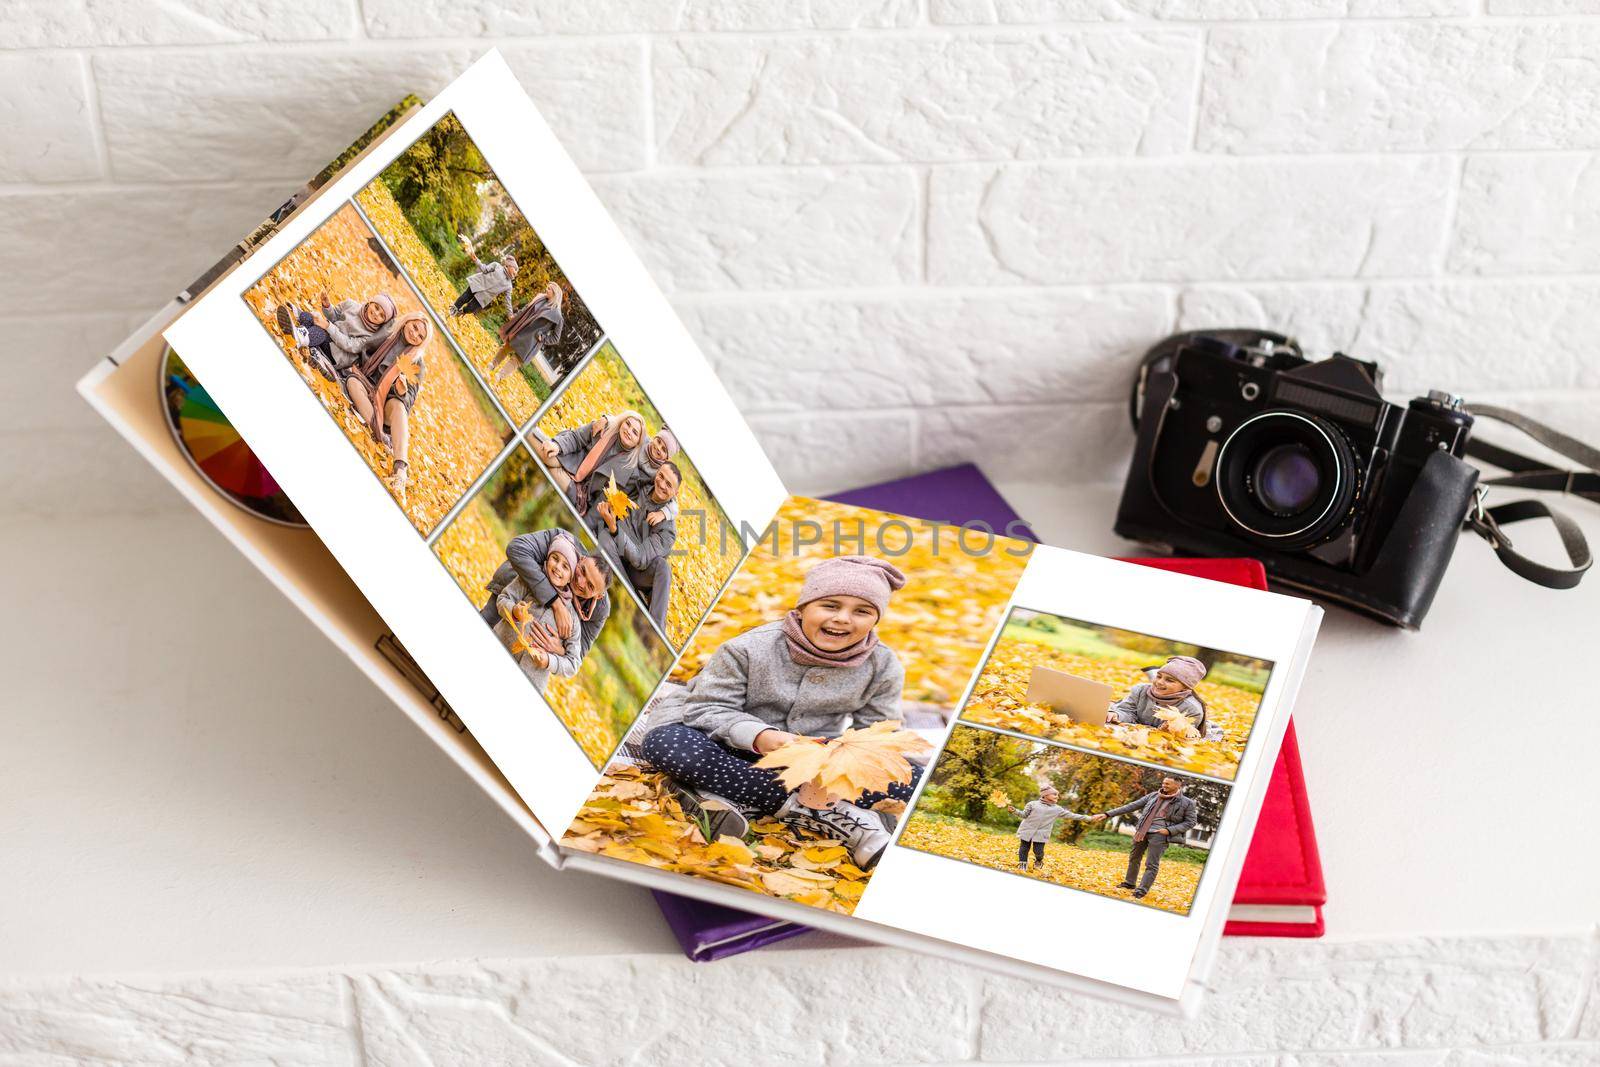 family photo book from autumn shooting